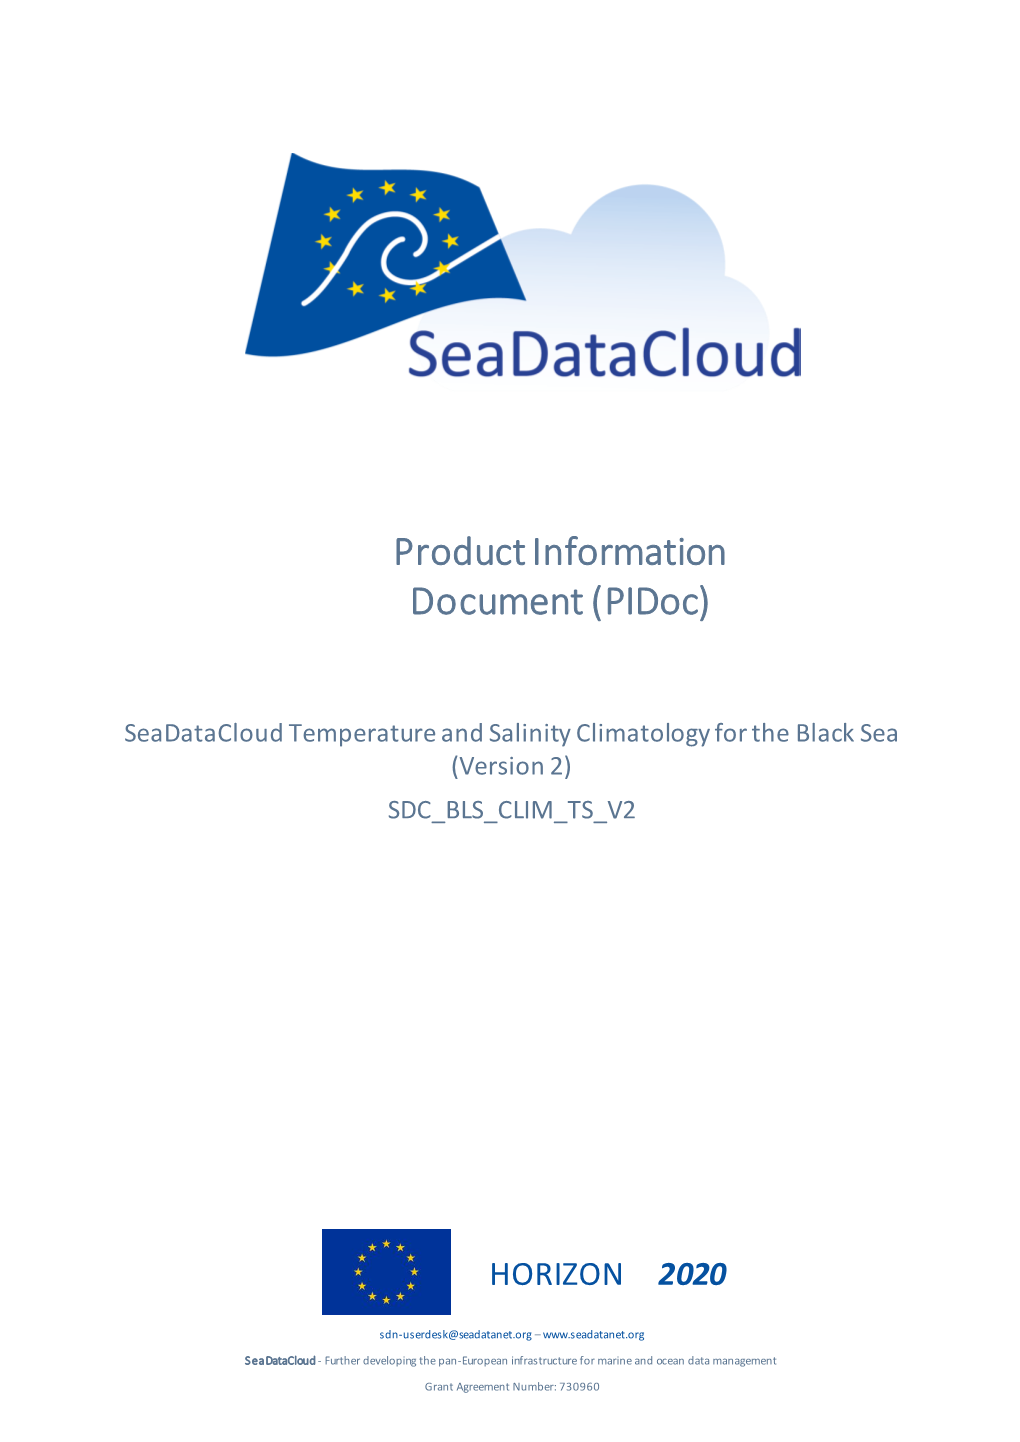 Seadatacloud Temperature and Salinity Climatology for the Black Sea (Version 2) SDC BLS CLIM TS V2